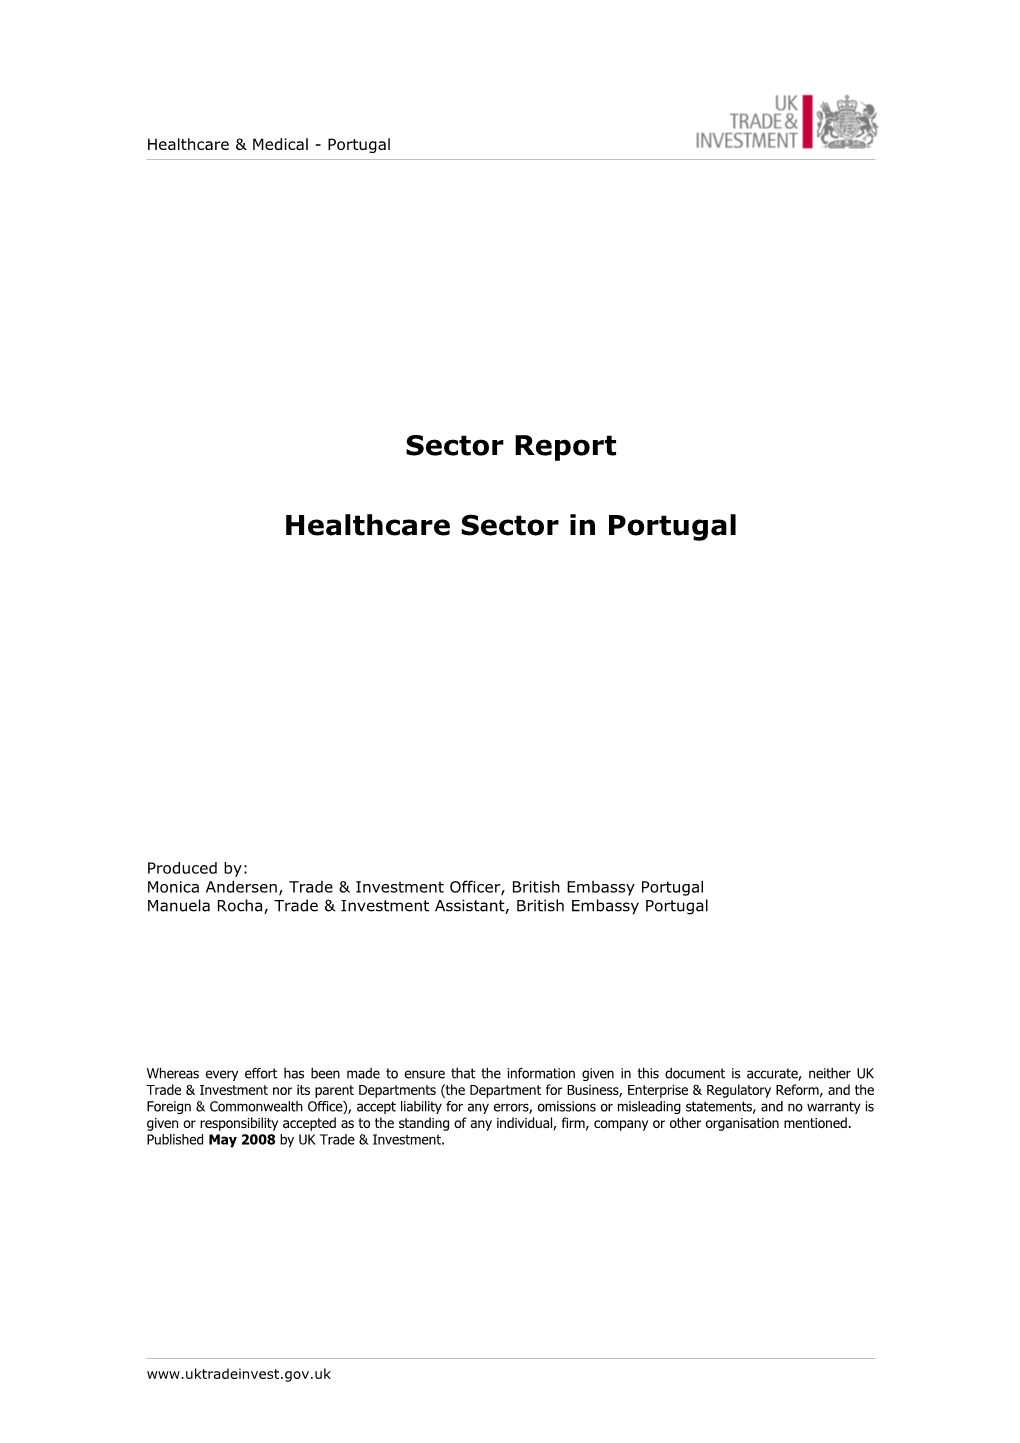 Sector Report Template